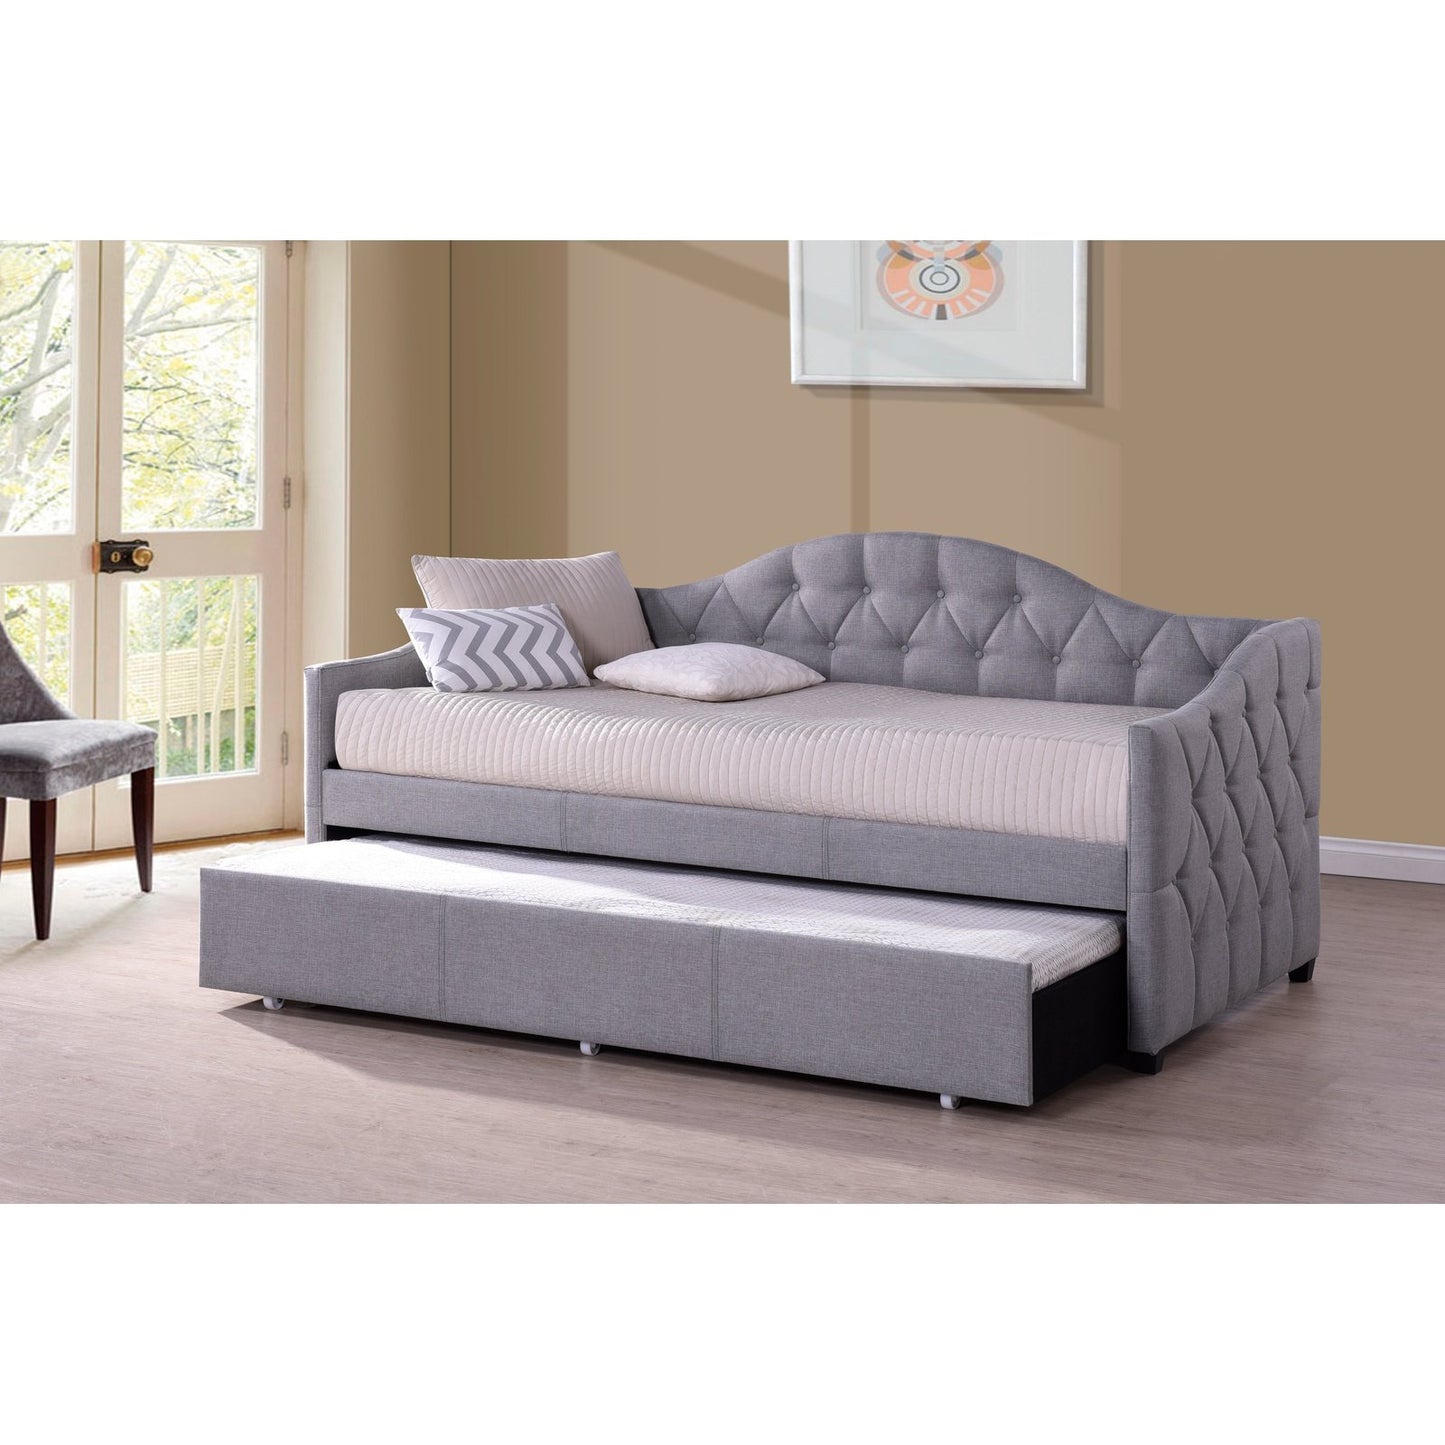 Hillsdale Furniture Jamie Upholstered Twin Daybed with Trundle, Gray